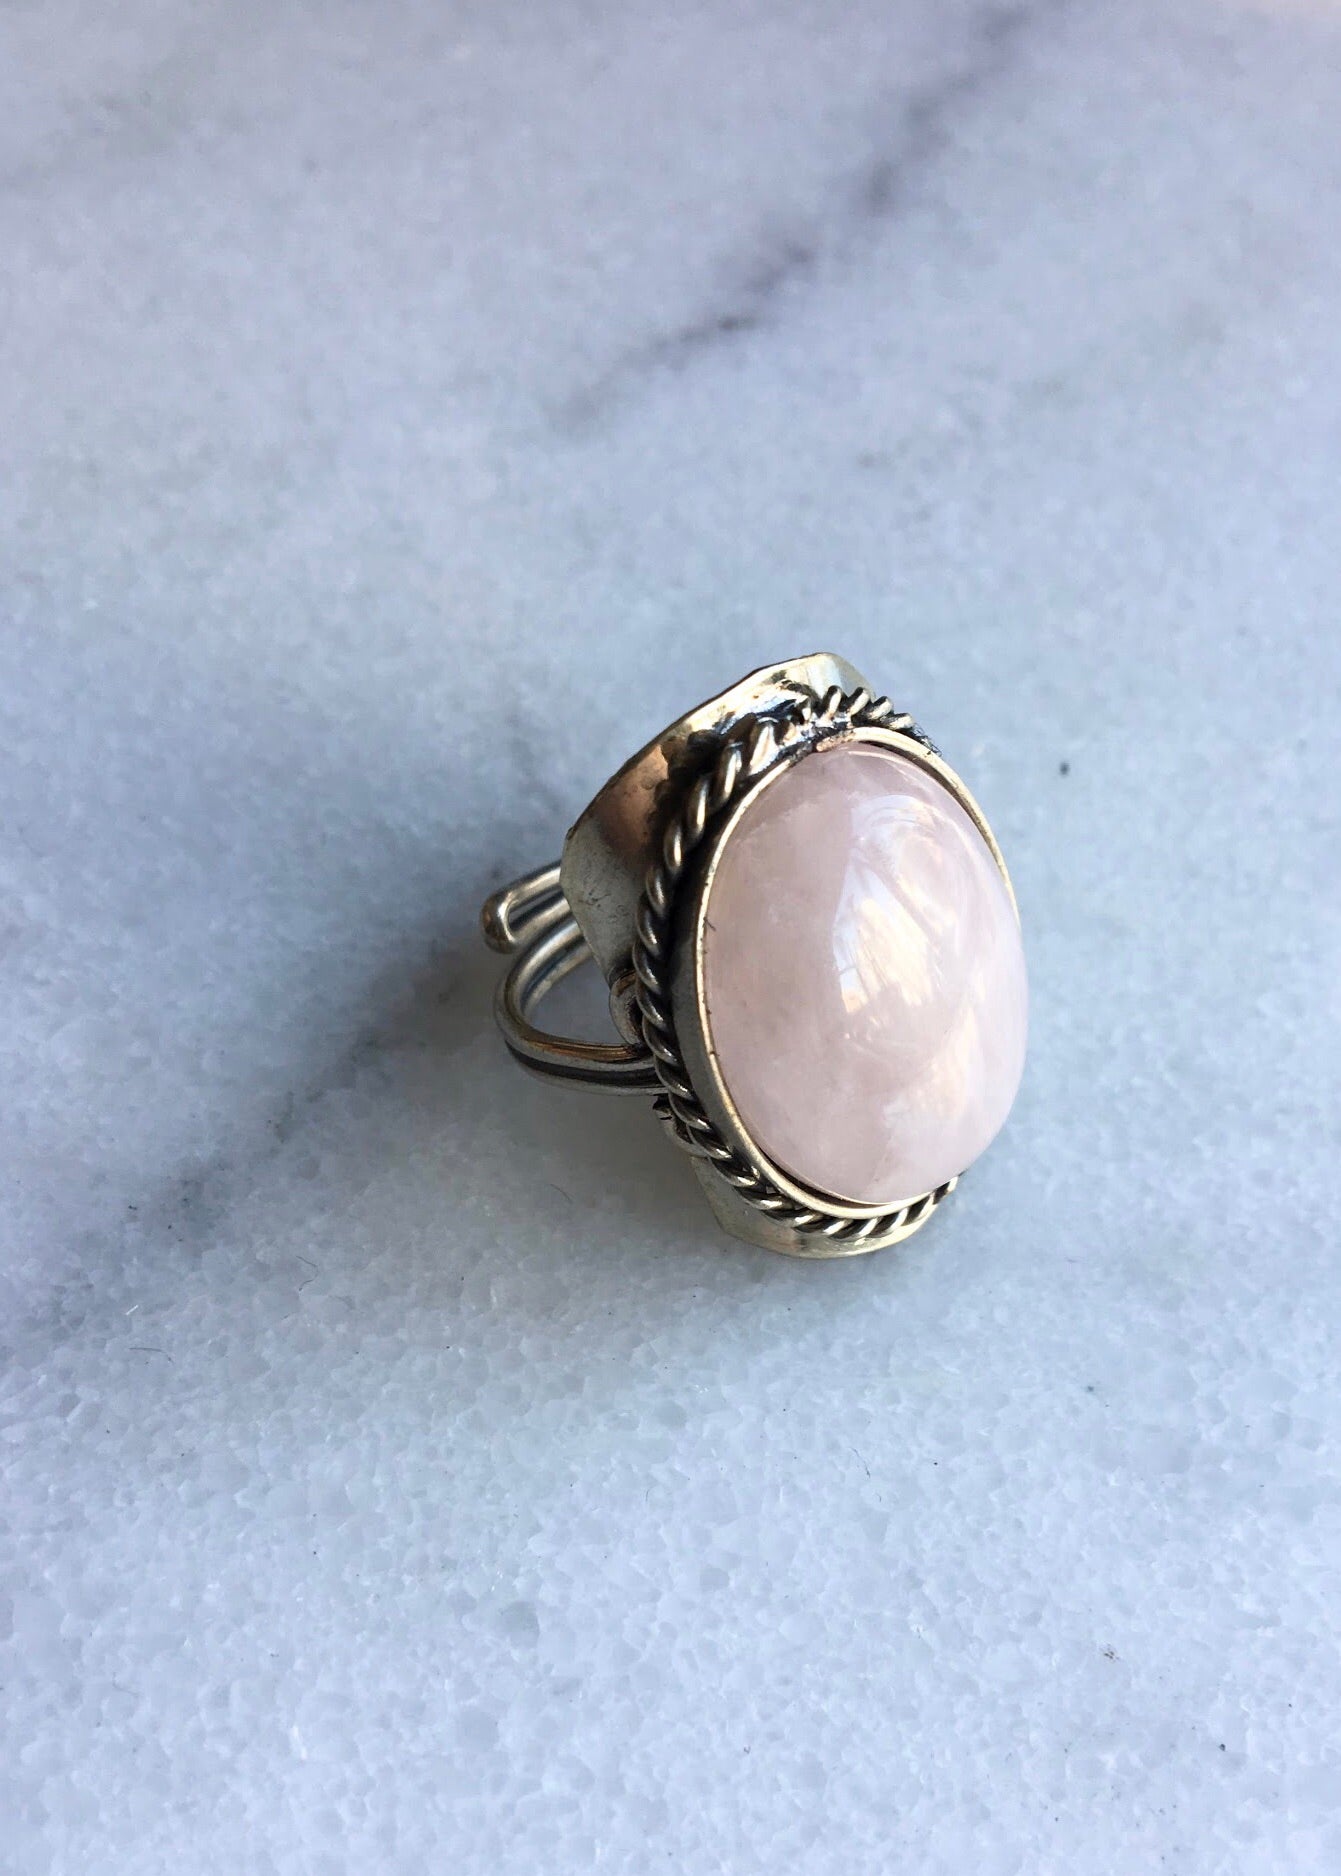 3ct Natural Rose Quartz Ring for Daily Wear 925 Silver 8mm*10mm Rose Quartz  Jewelry 18K Gold Plating Gemstone Ring - AliExpress